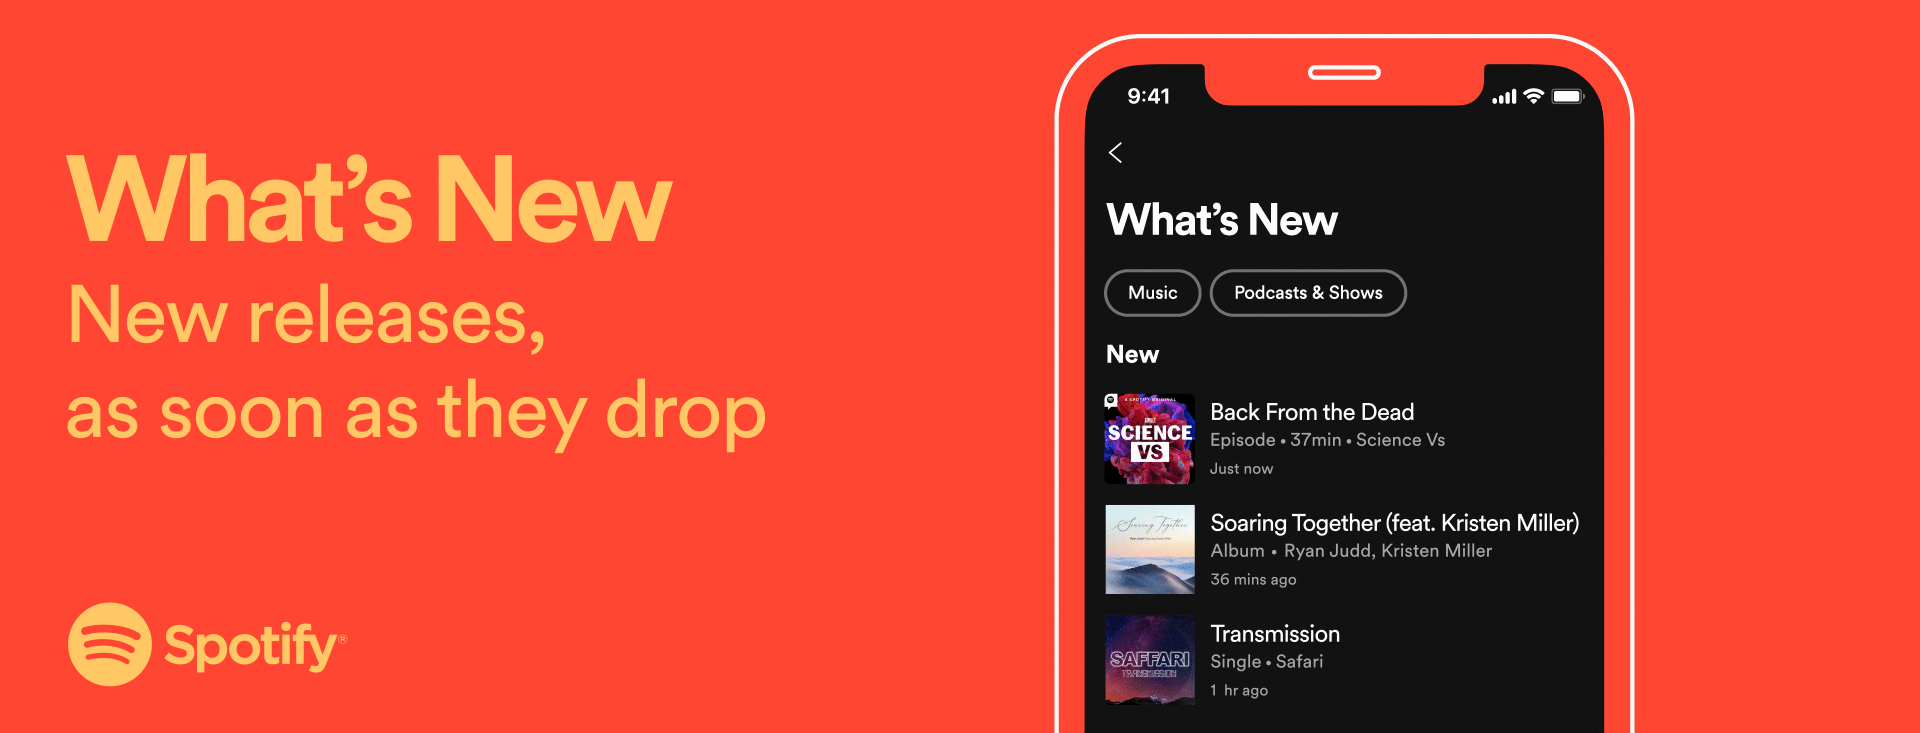 Spotify ‘What’s New’ is a feed of all the latest releases from the artists and podcasts you follow